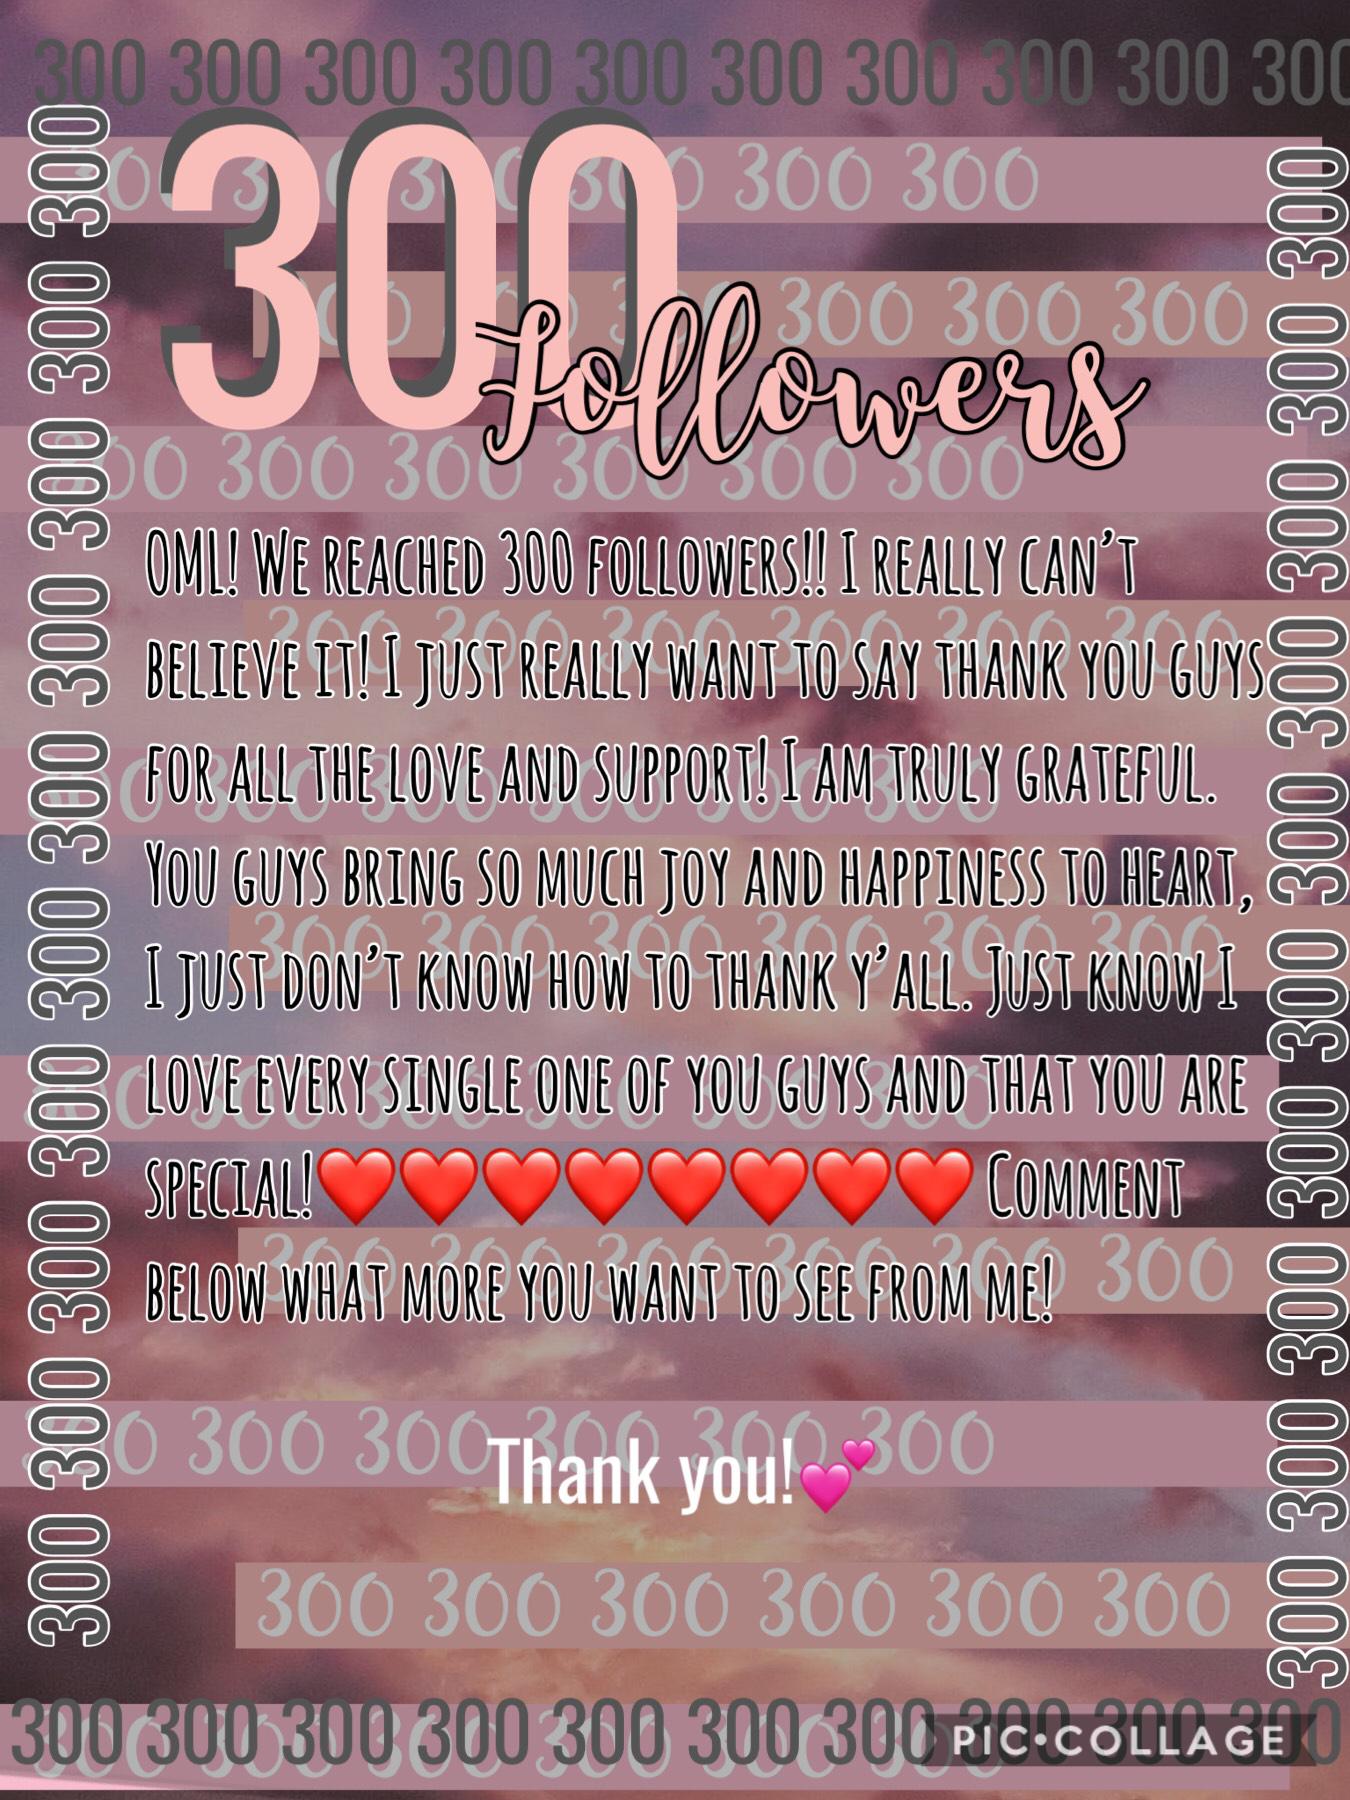 Tysm to you all! I love you guys soo much!💖💖💖